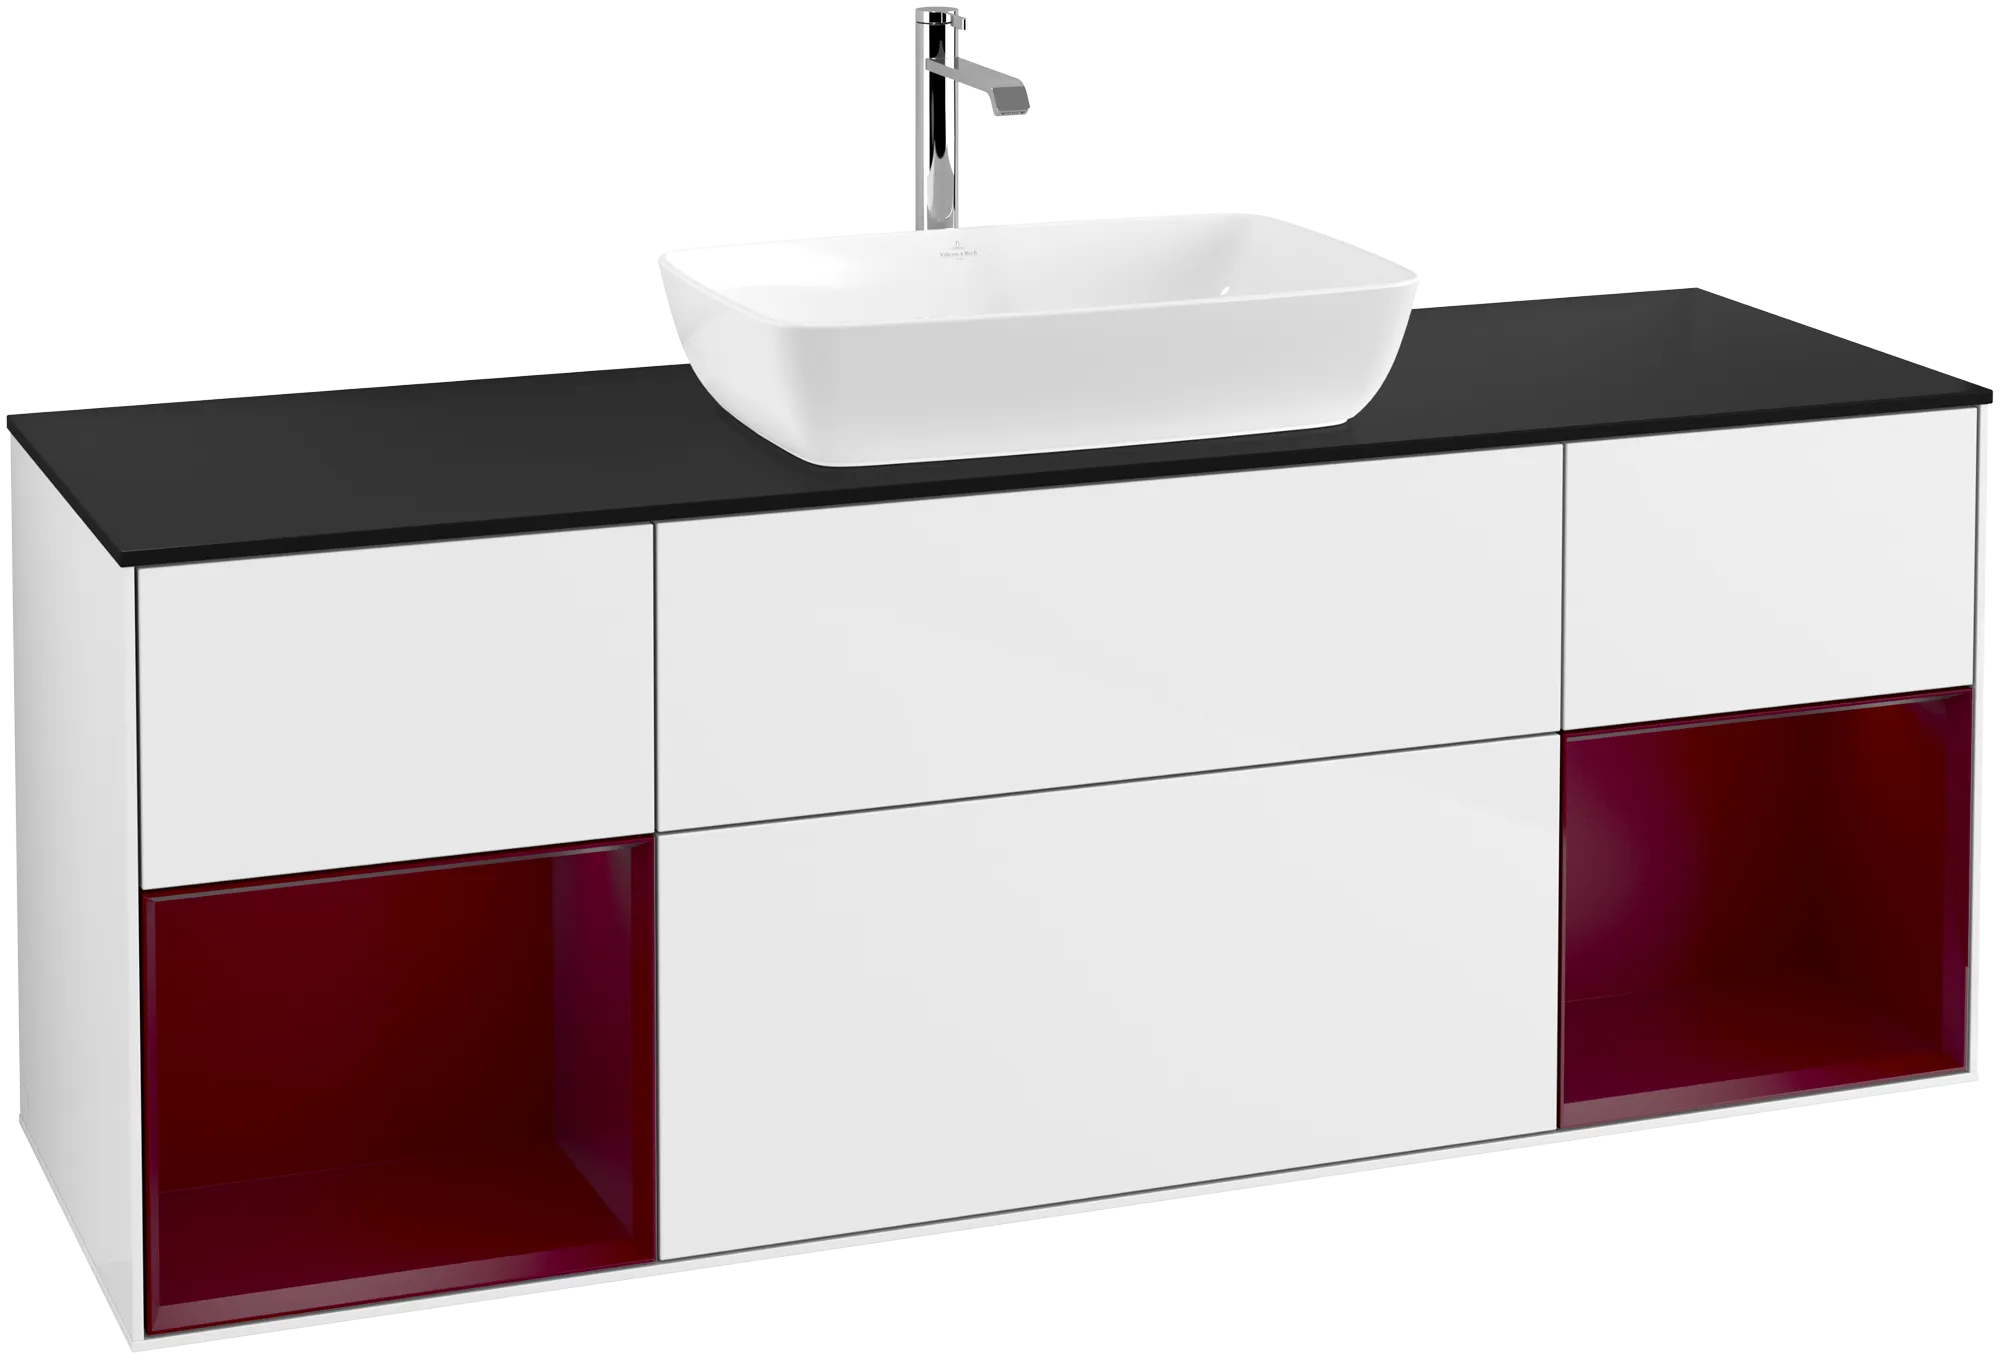 Obrázek VILLEROY BOCH Finion Vanity unit, with lighting, 4 pull-out compartments, 1600 x 603 x 501 mm, Glossy White Lacquer / Peony Matt Lacquer / Glass Black Matt #G862HBGF